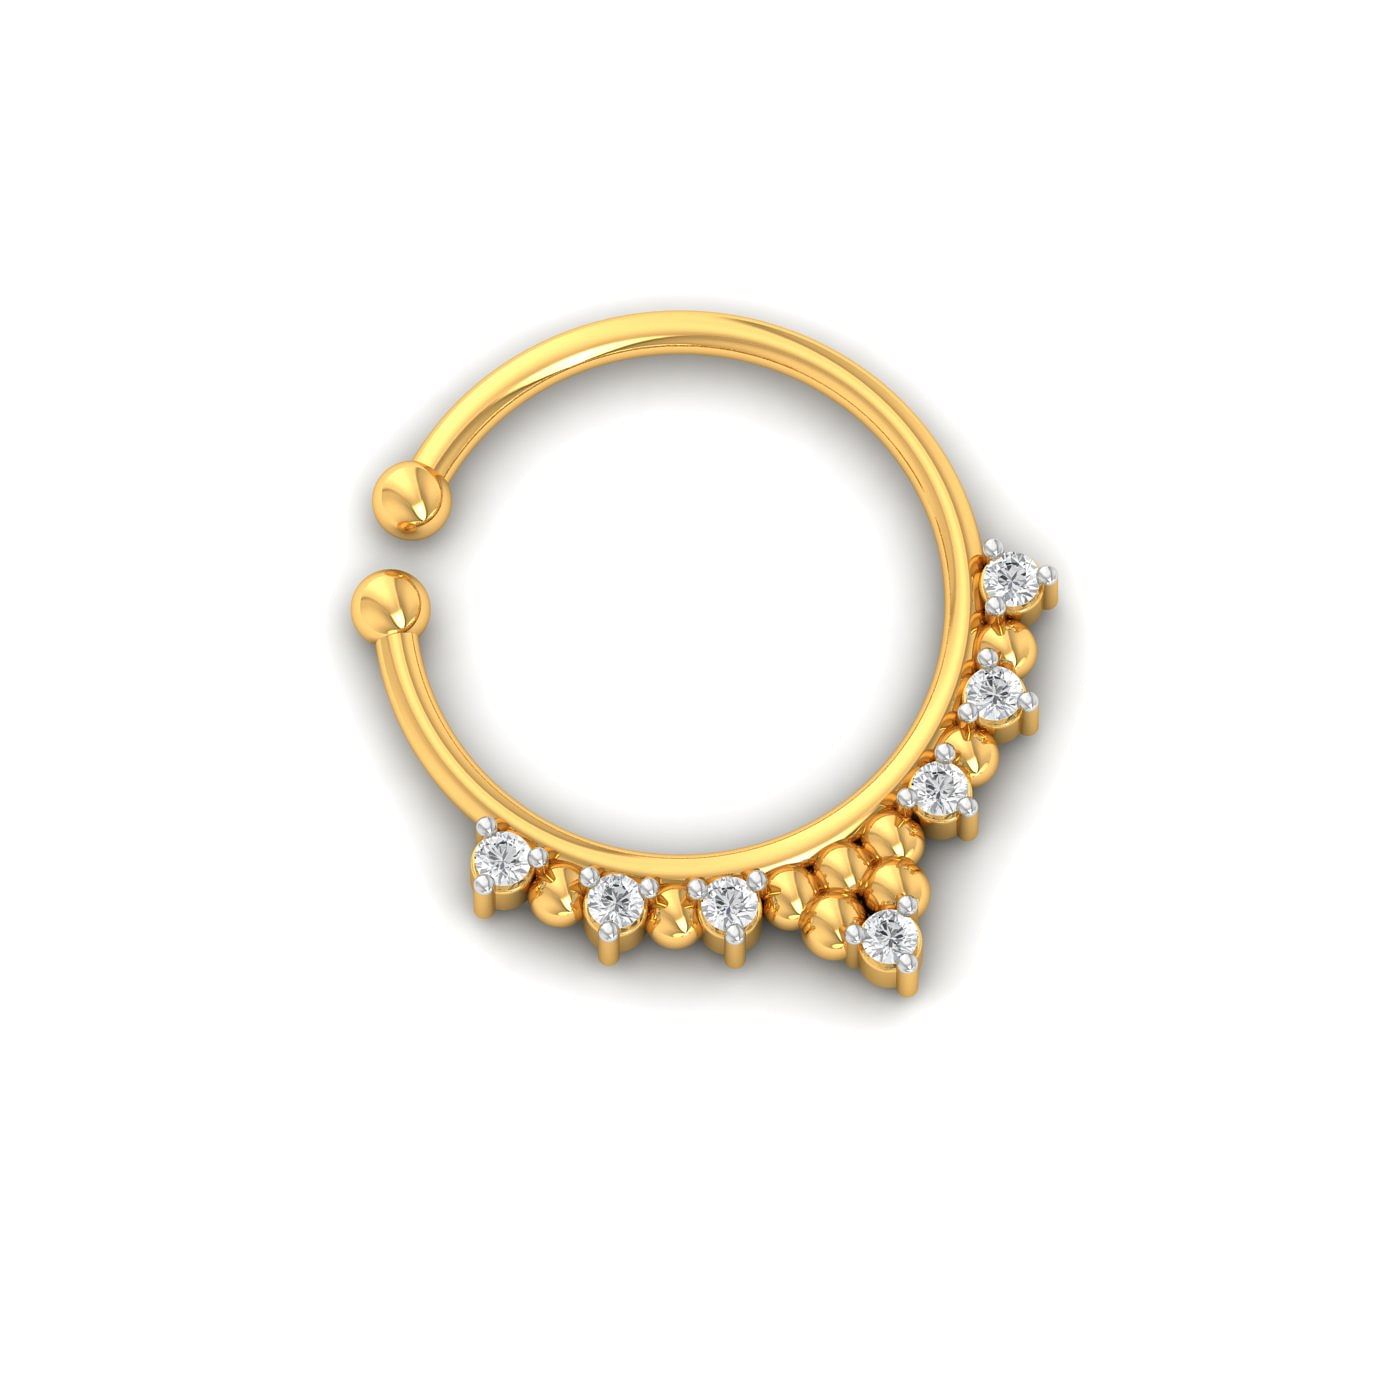 Unni Tribal Style Nose Pin With Yellow Gold